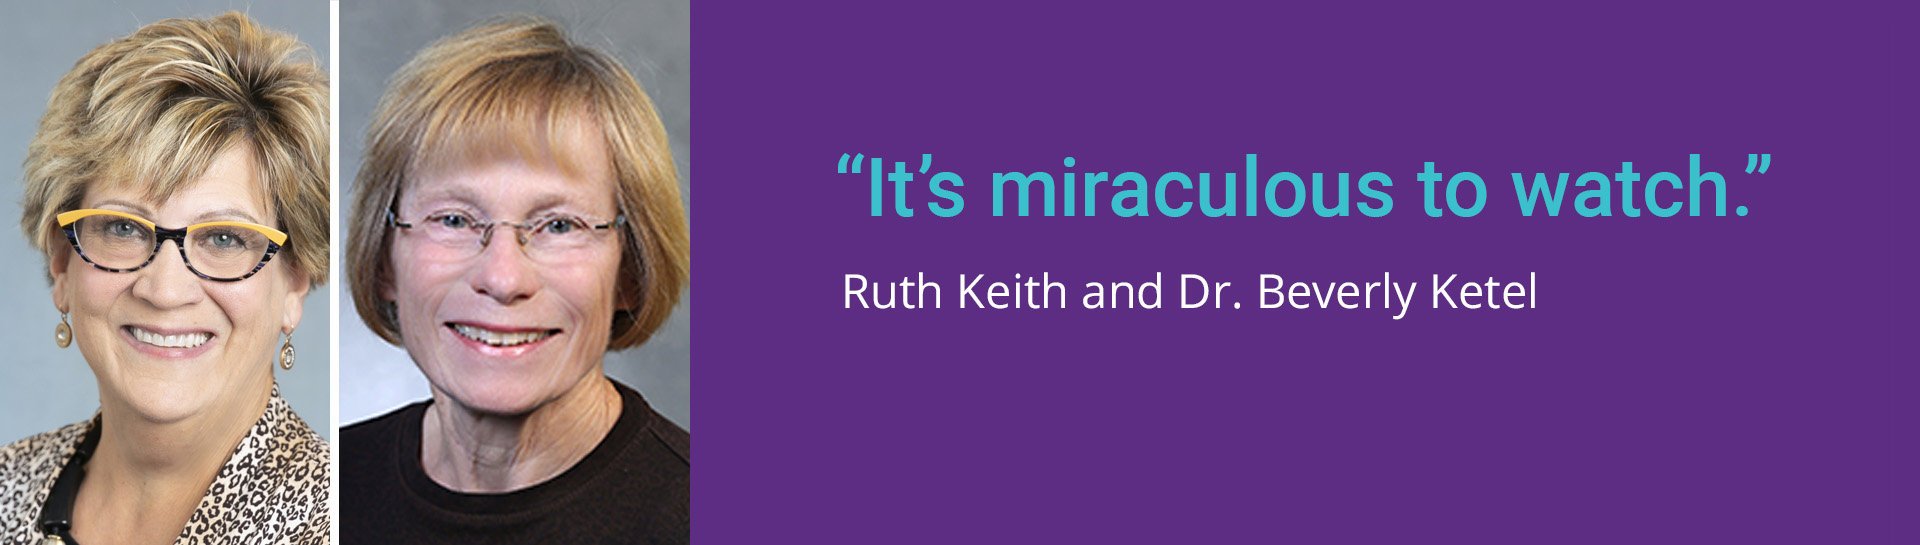 Photo of Ruth Keith and retired transplant surgeon Dr. Beverly Ketel with text: "It's miraculous to watch."